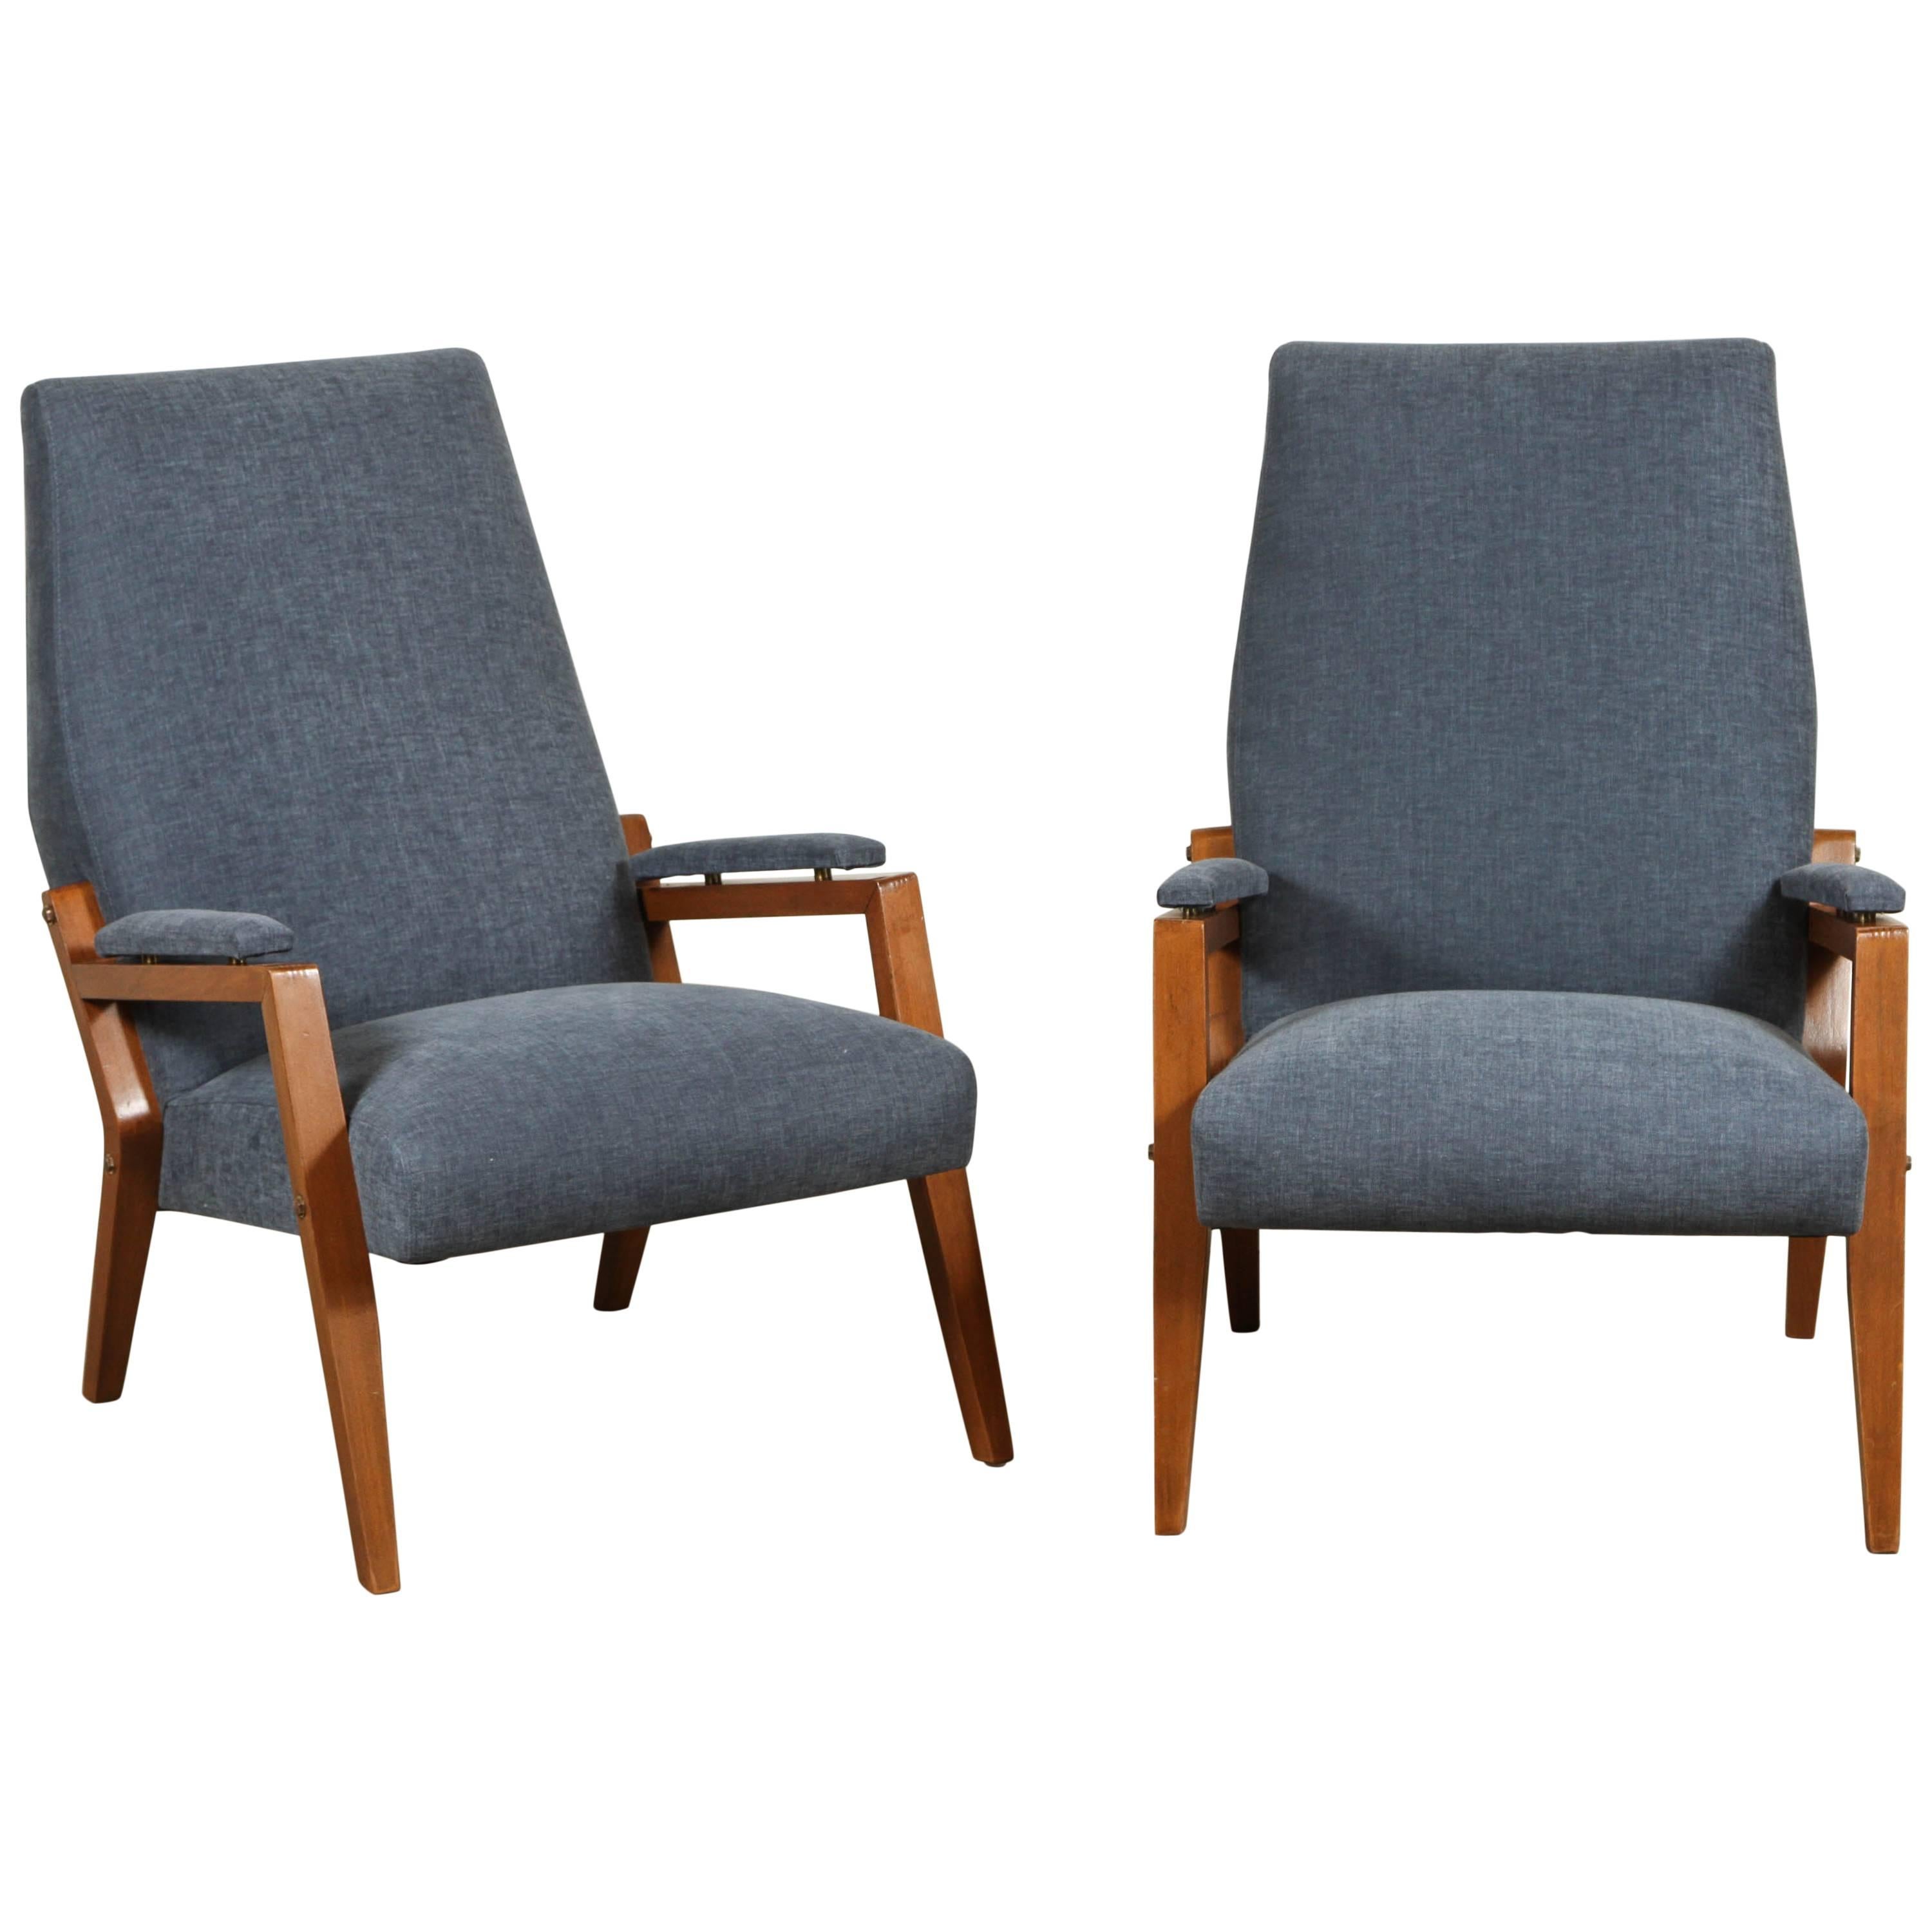 Pair of Sculptural Italian Fruitwood Armchairs